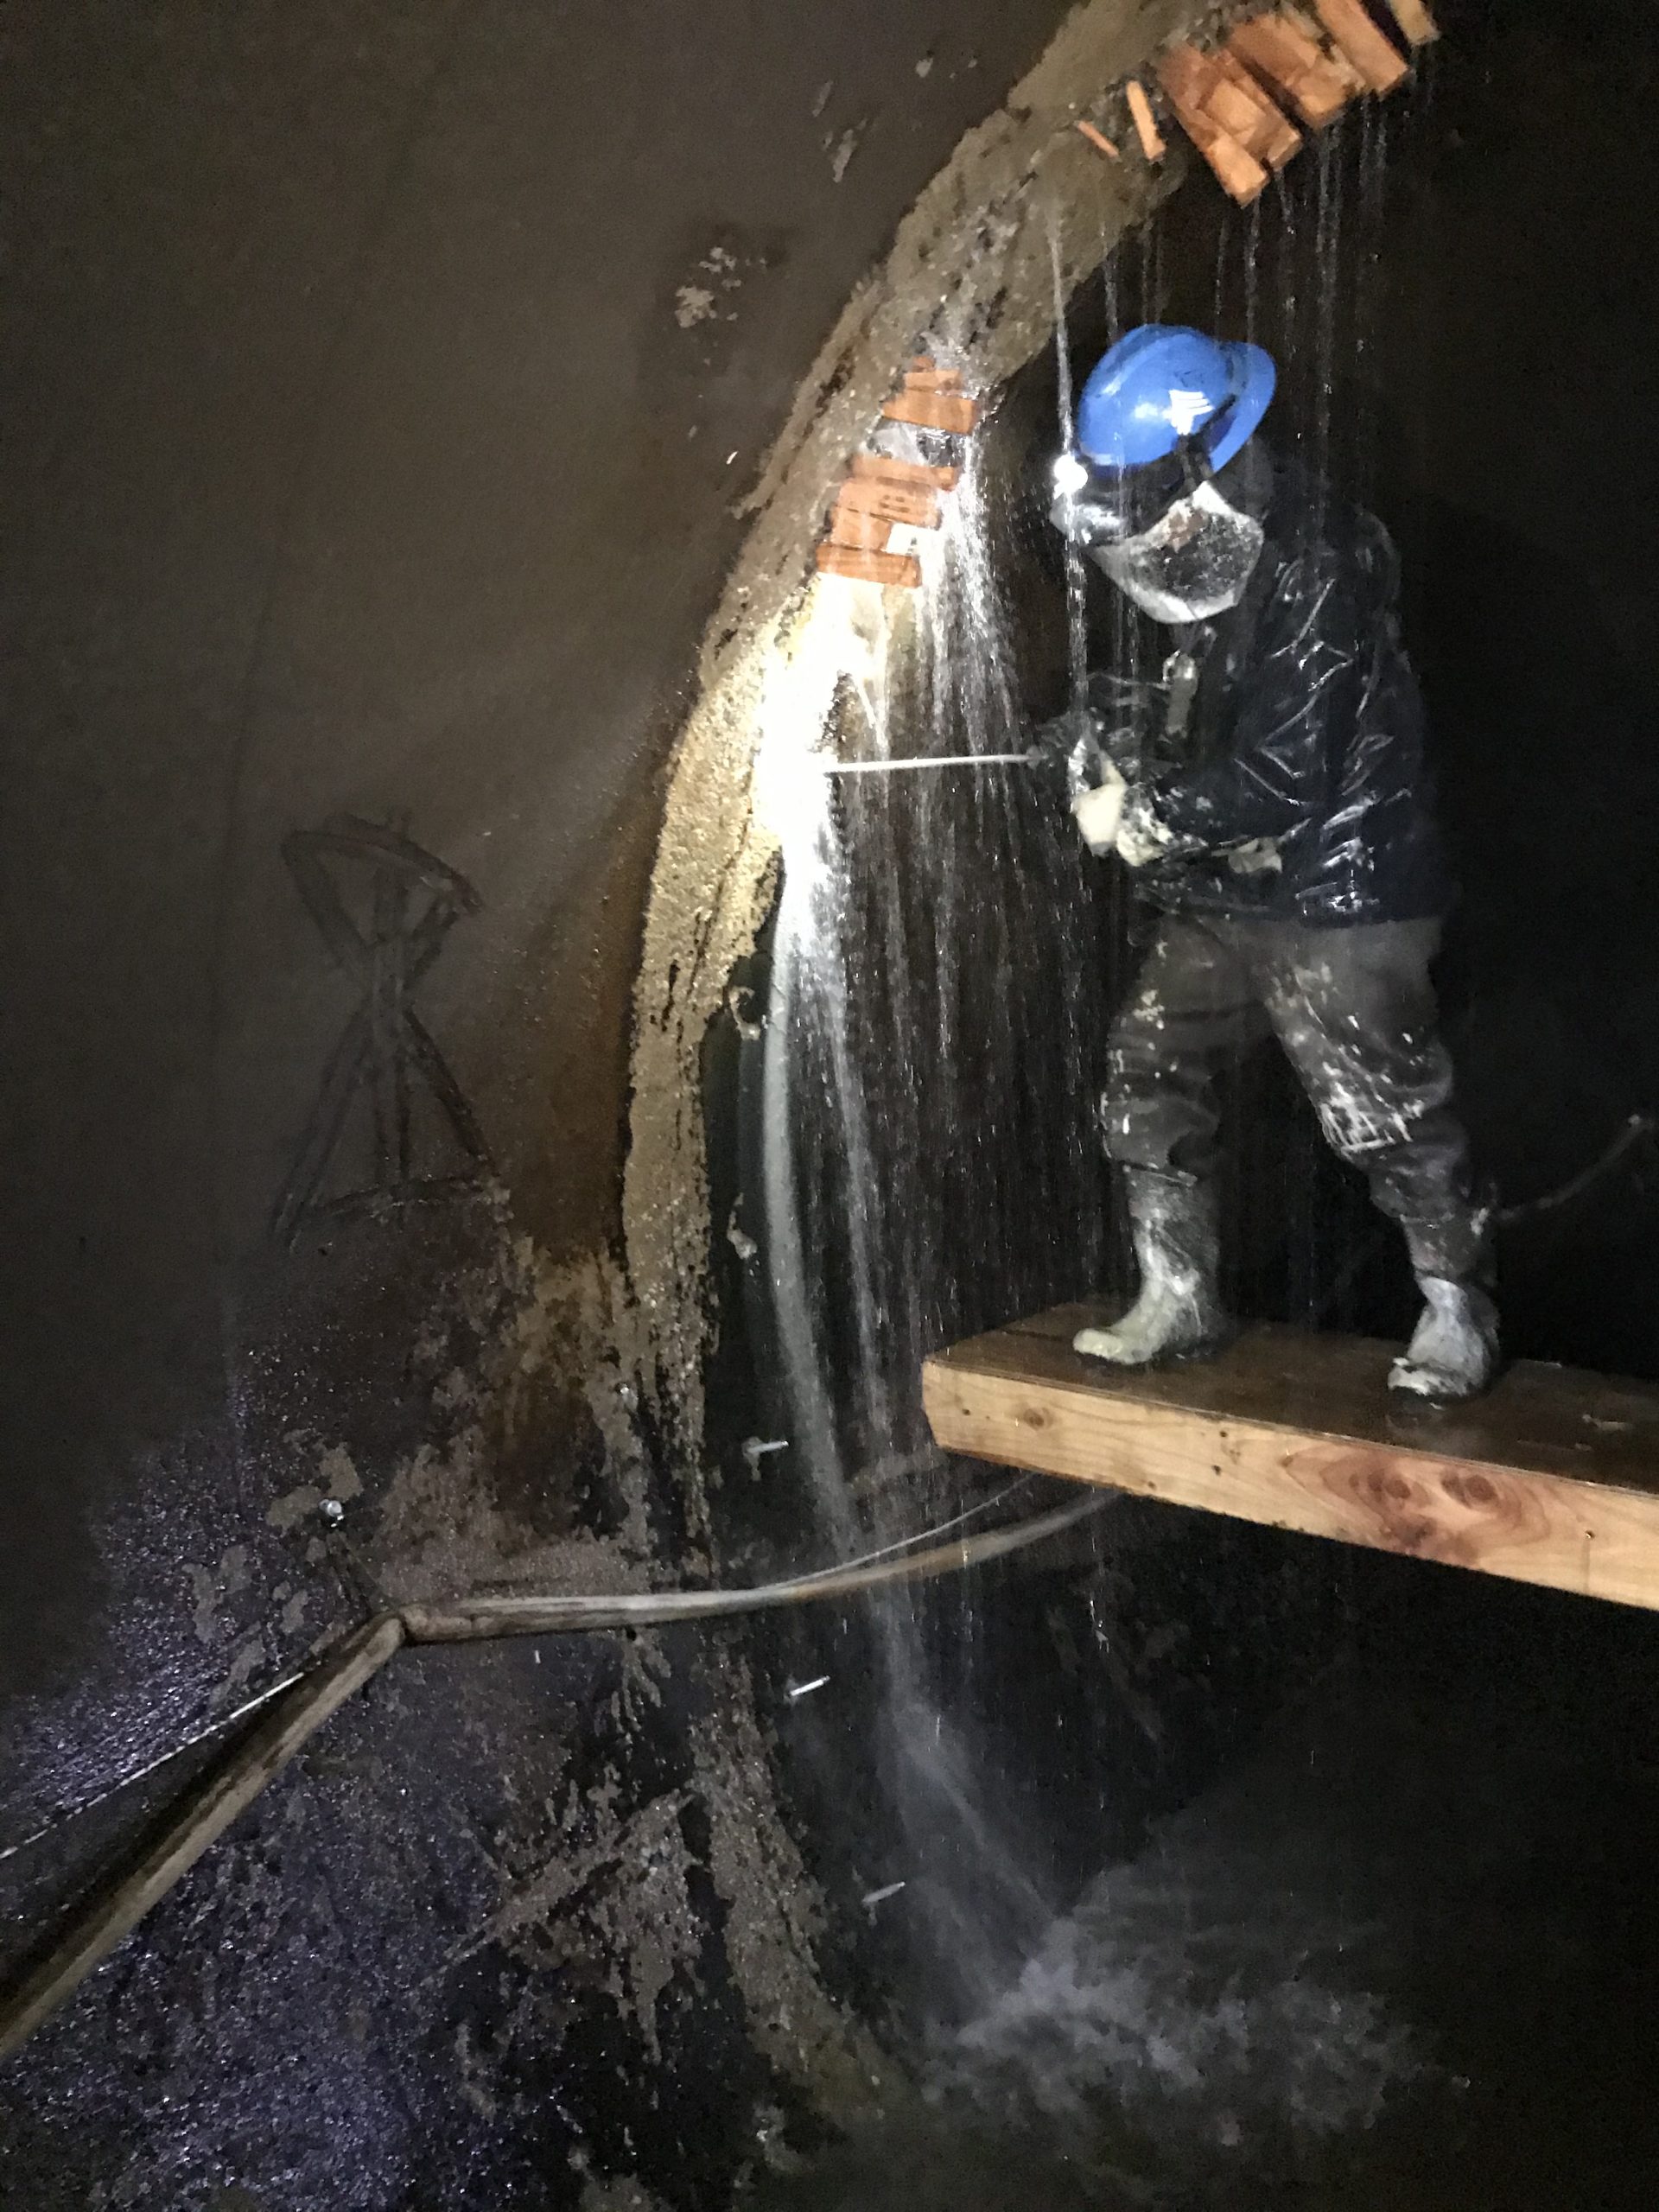 A man stands on a platform, in a hard hat and safety gear, spraing something onto a wall of a tunnel.